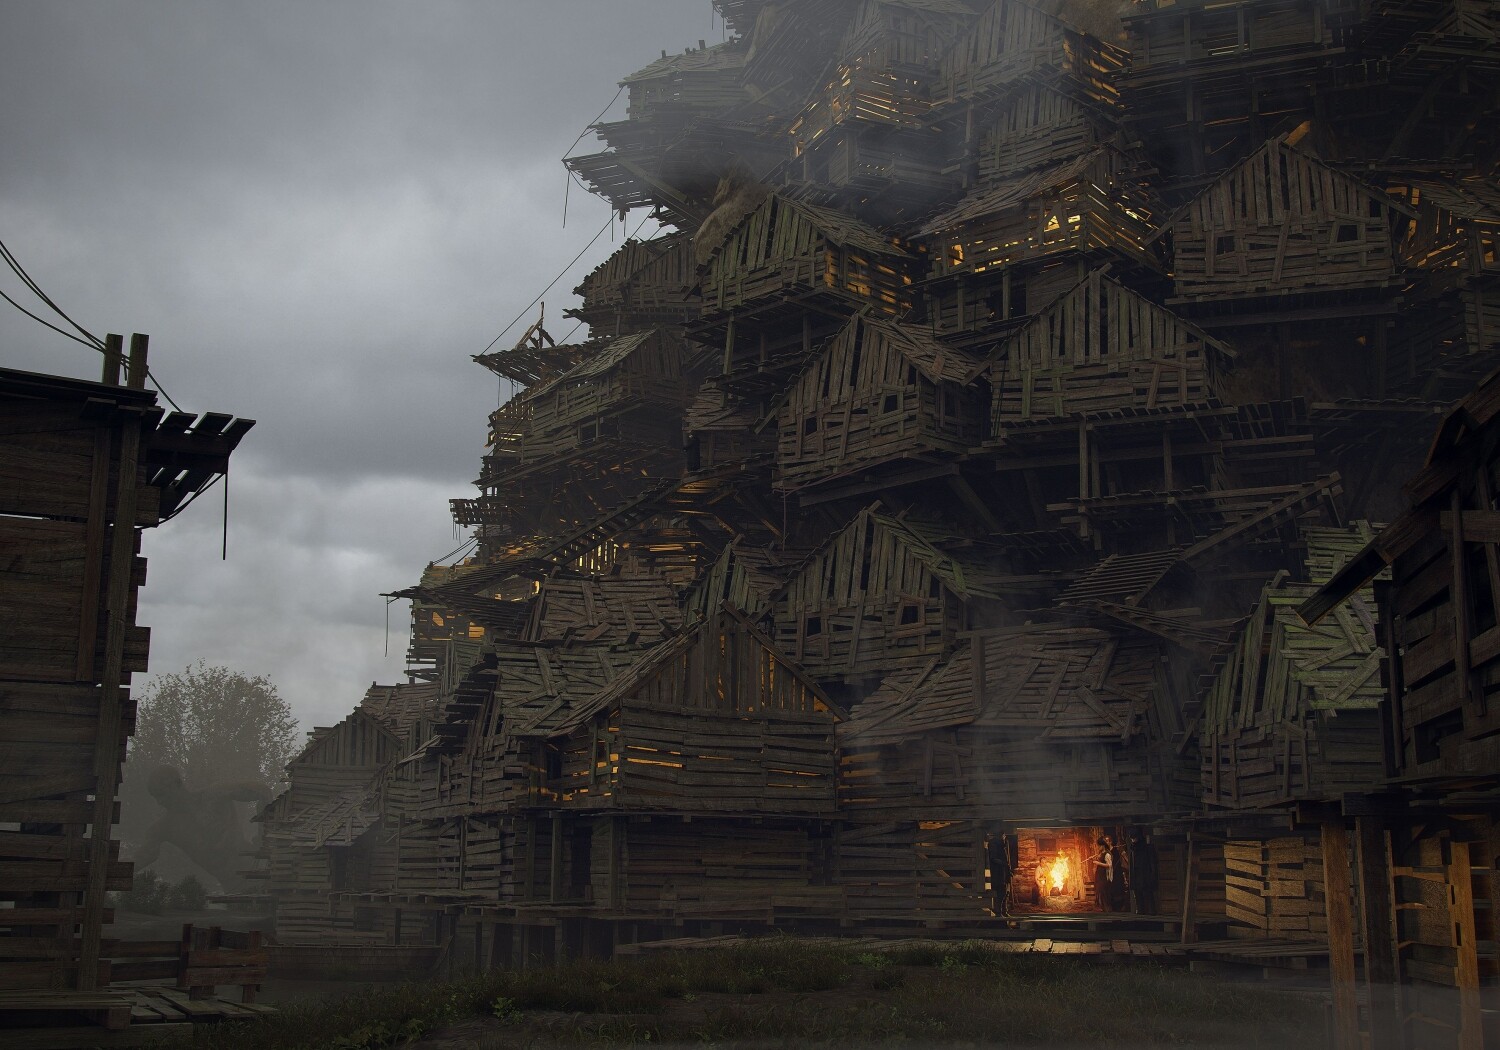 slightly more zoomed in view of a dilapidated and ramshackle pile of wooden houses and shacks, with a campfire in one of the bottom levels